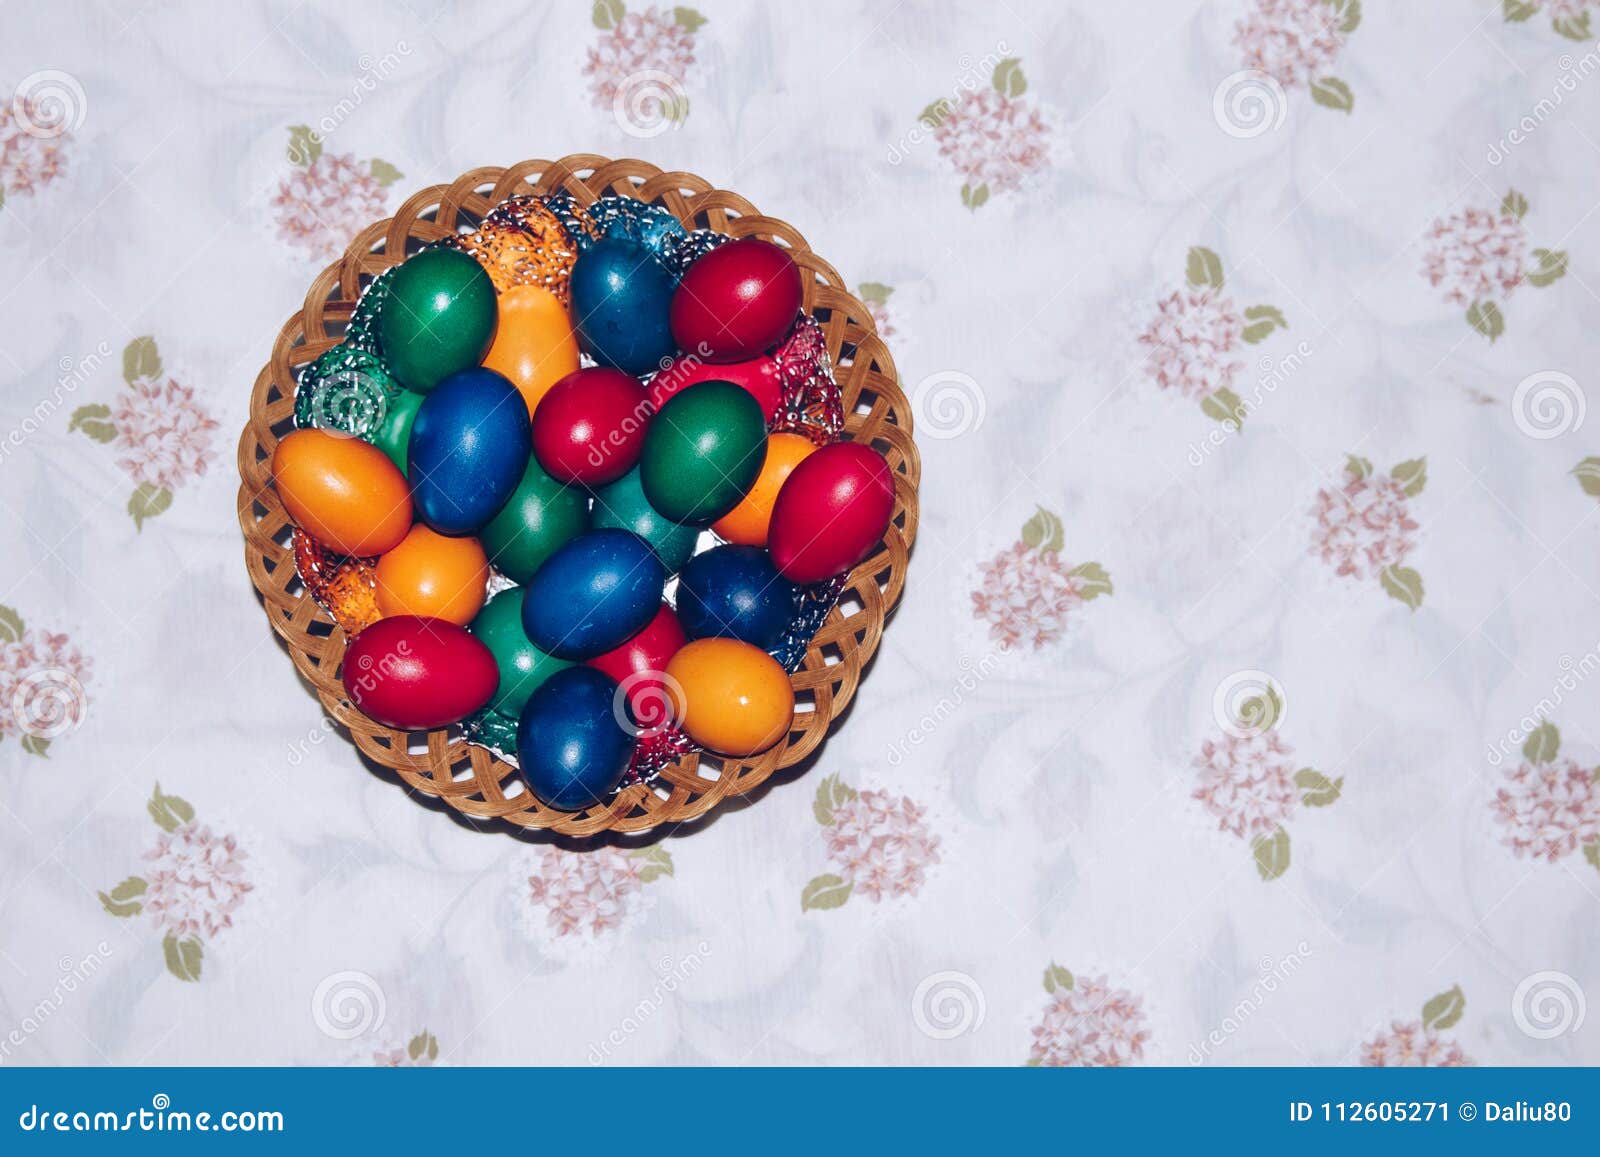 Close Up of Colorful Easter Eggs in a Basket. Happy Easter, Christian ...